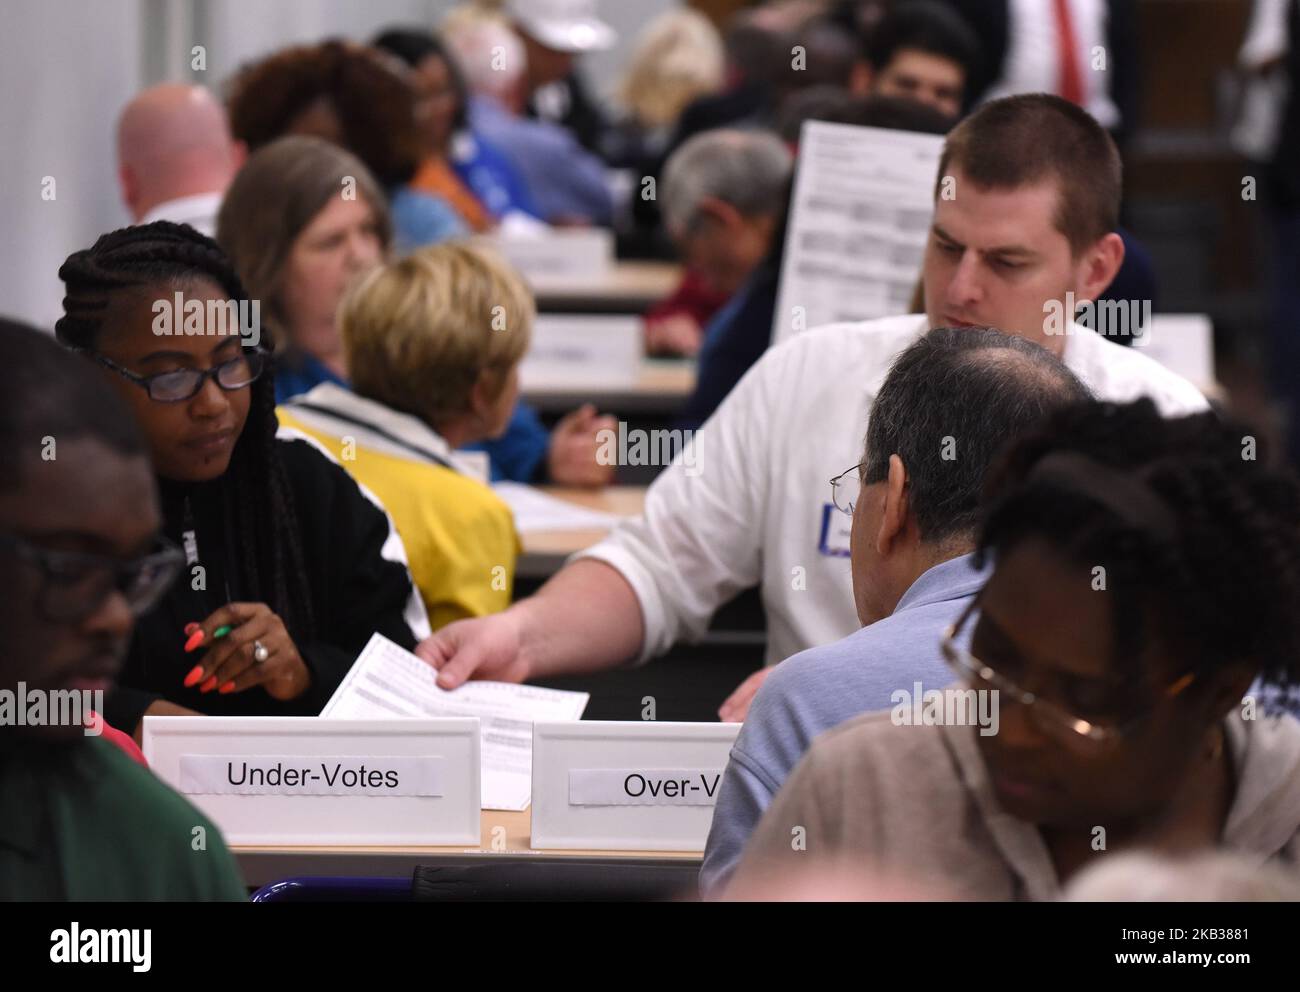 November 16, 2018 - Orlando, Florida, United States - Election workers perform a manual recount of ballots on November 16, 2018 at the Orange County Supervisor of Elections Office in Orlando, Florida. On November 15, 2018, a statewide manual recount of votes was ordered in the hotly contested Senate race between Republican Governor Rick Scott and Democrat Bill Nelson, as well as the close race for Florida Agriculture Commissioner. (Photo by Paul Hennessy/NurPhoto) Stock Photo